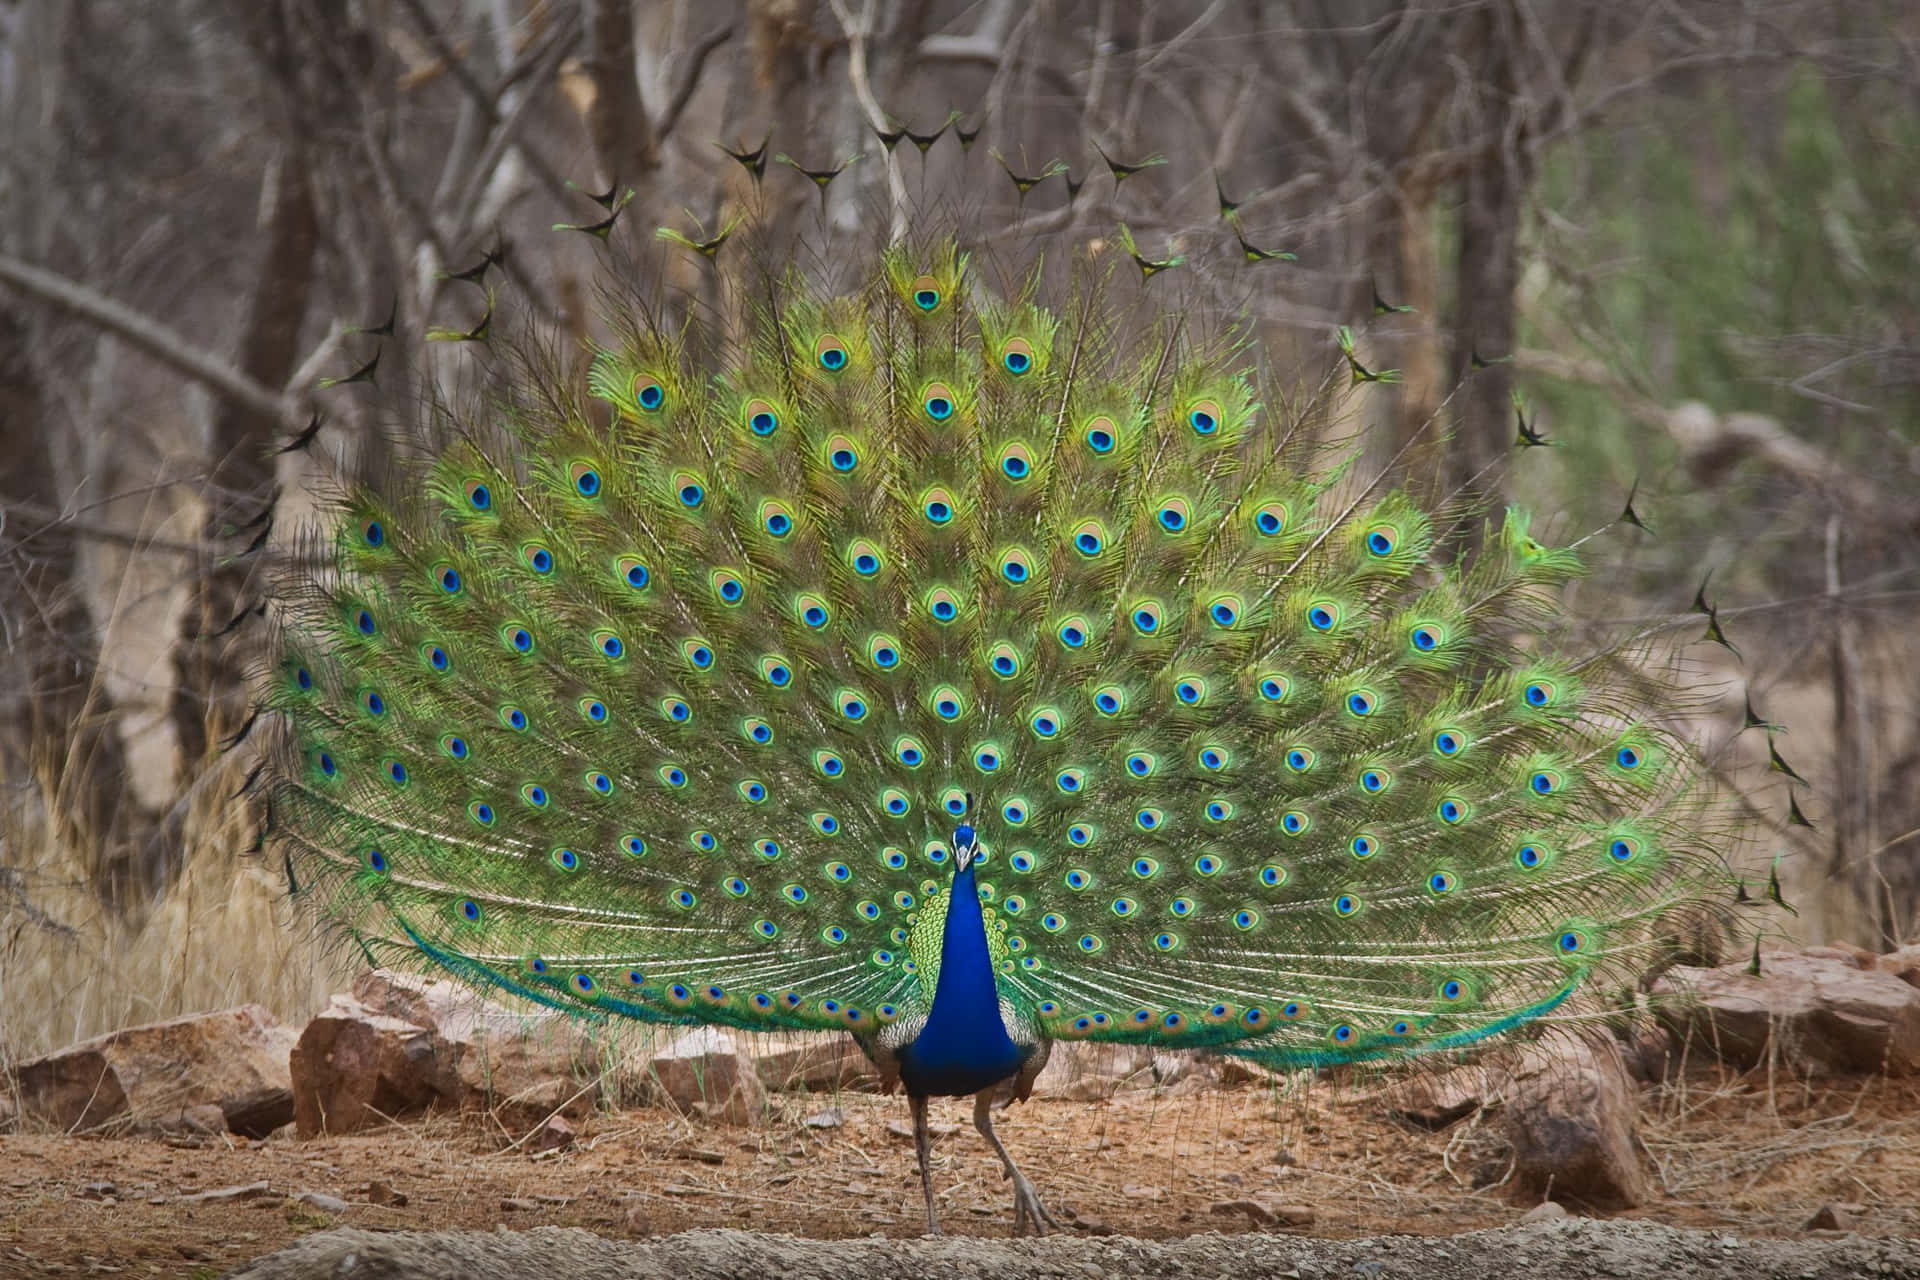 A majestic peacock displaying its impressive tail.